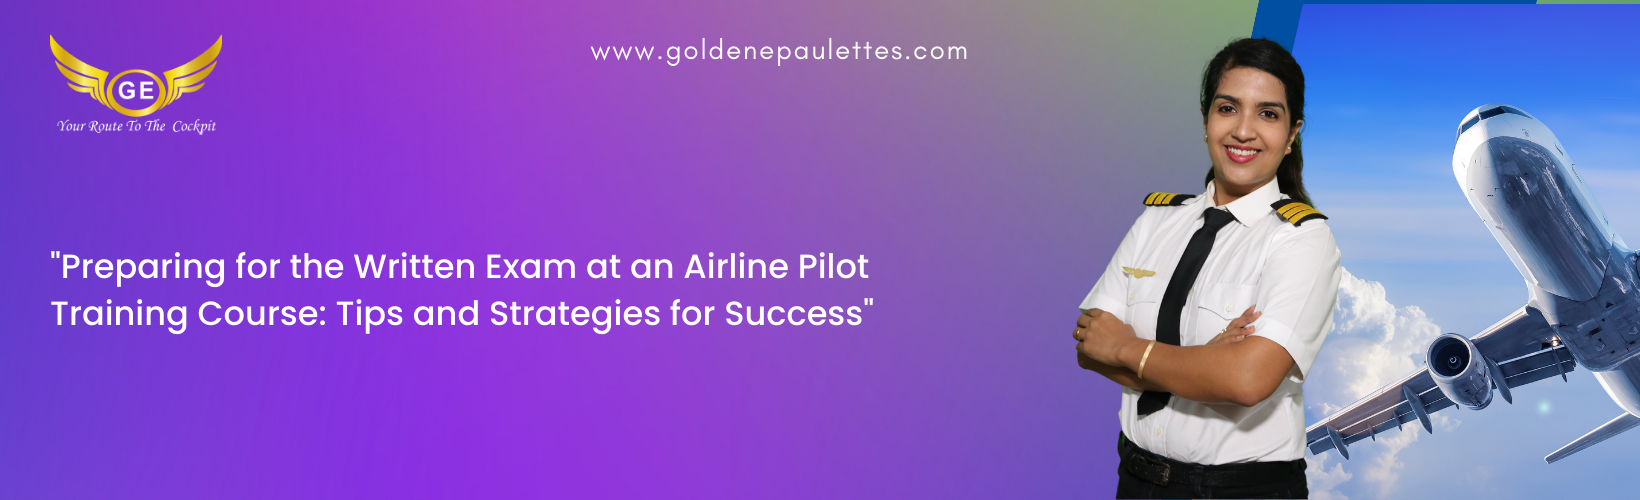 The Benefits of Taking an Airline Preparation Course in Written Exam Preparation